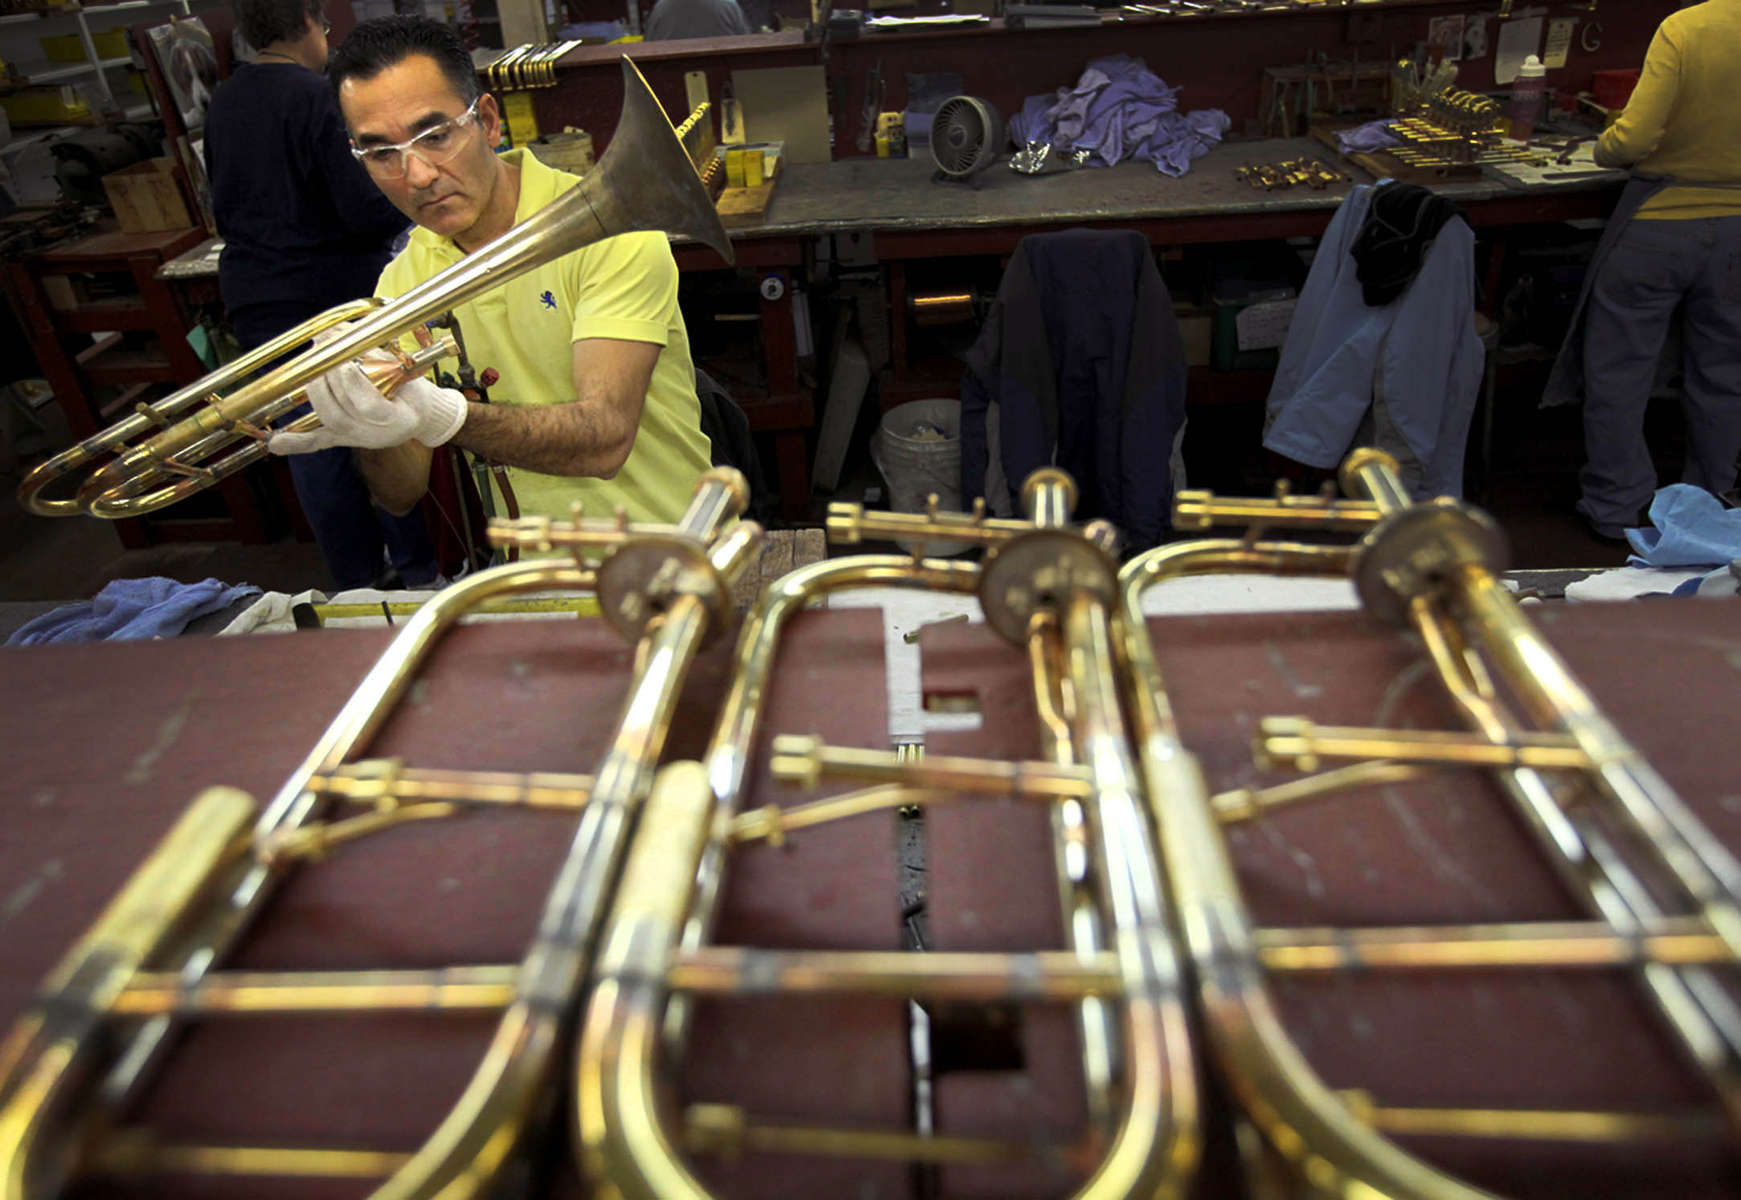 Edwards Instrument Company of Elkhorn, WI., is one of three major players in the trombone market. Using horns made by their parent company, Getzen, the company works with musicians to build customized instruments. 